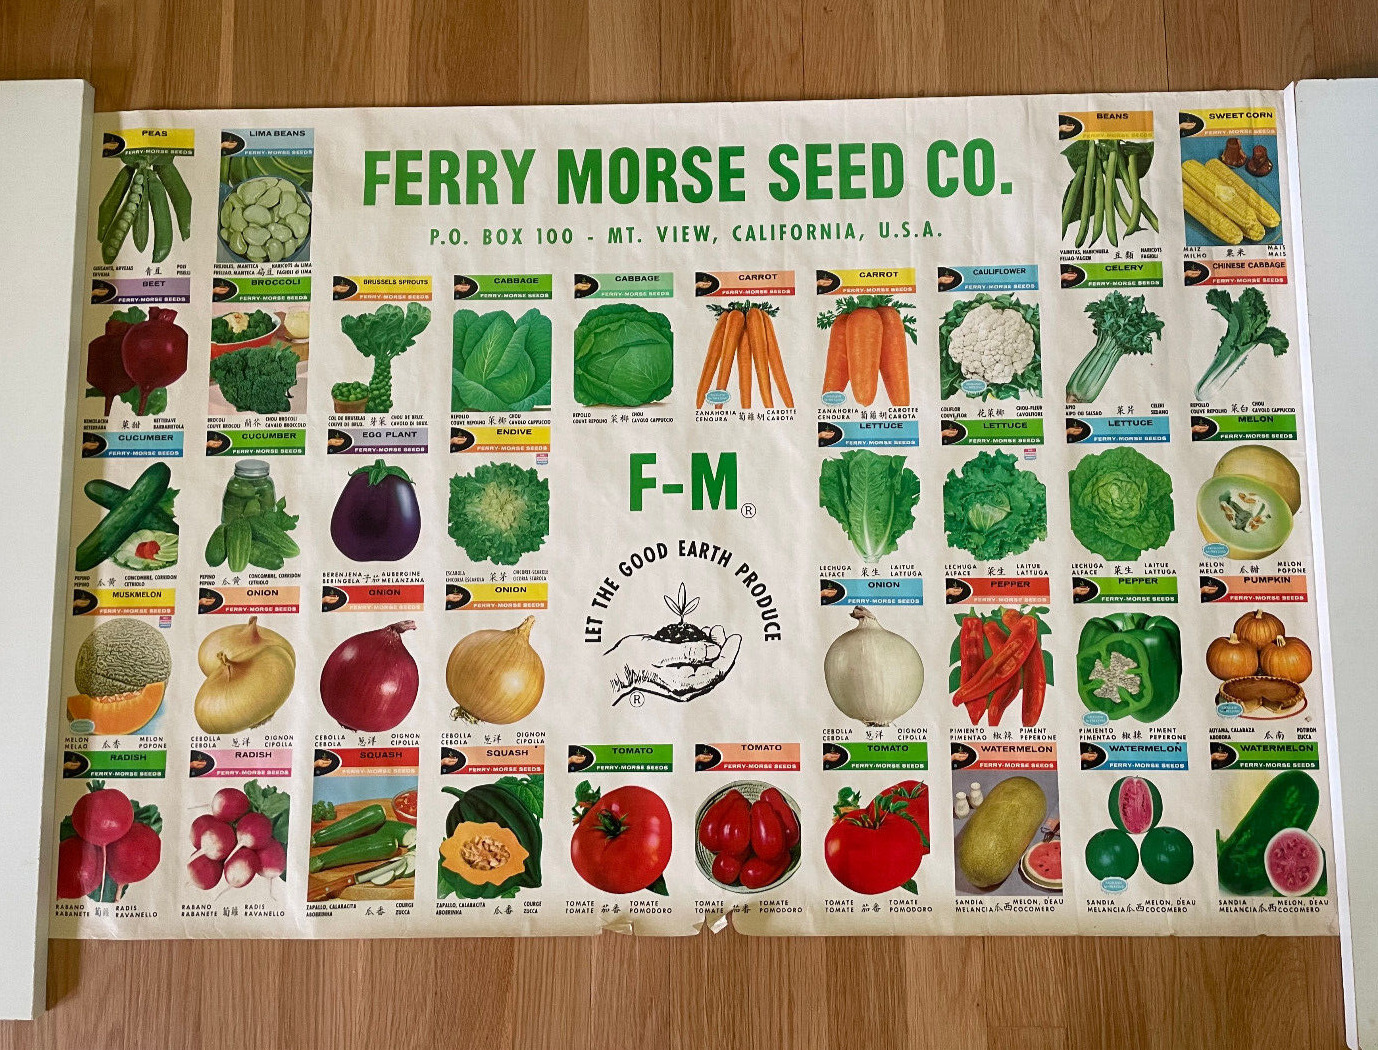 Vintage FERRY-MORSE SEED CO ADVERTISING Seeds Gardening Store Poster Display